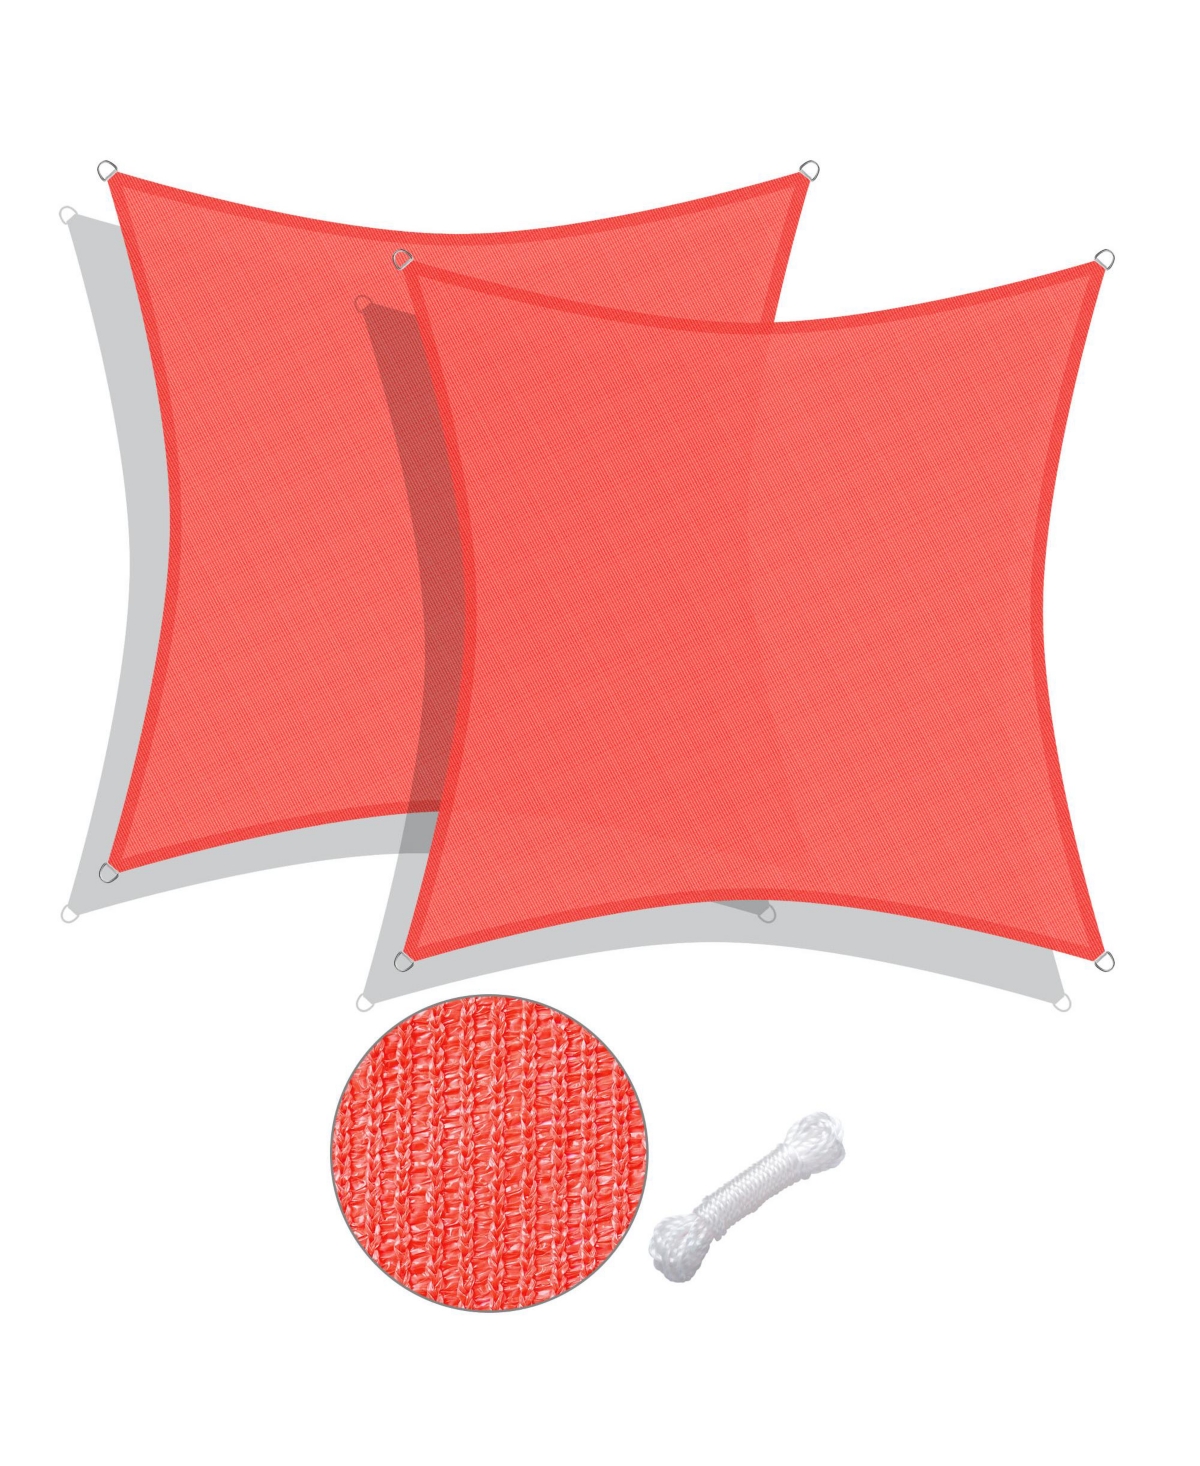 2 Pack 10x10 Ft 97% Uv Block Square Sun Shade Sail Canopy Cover Net Yard Park - Watermelon red